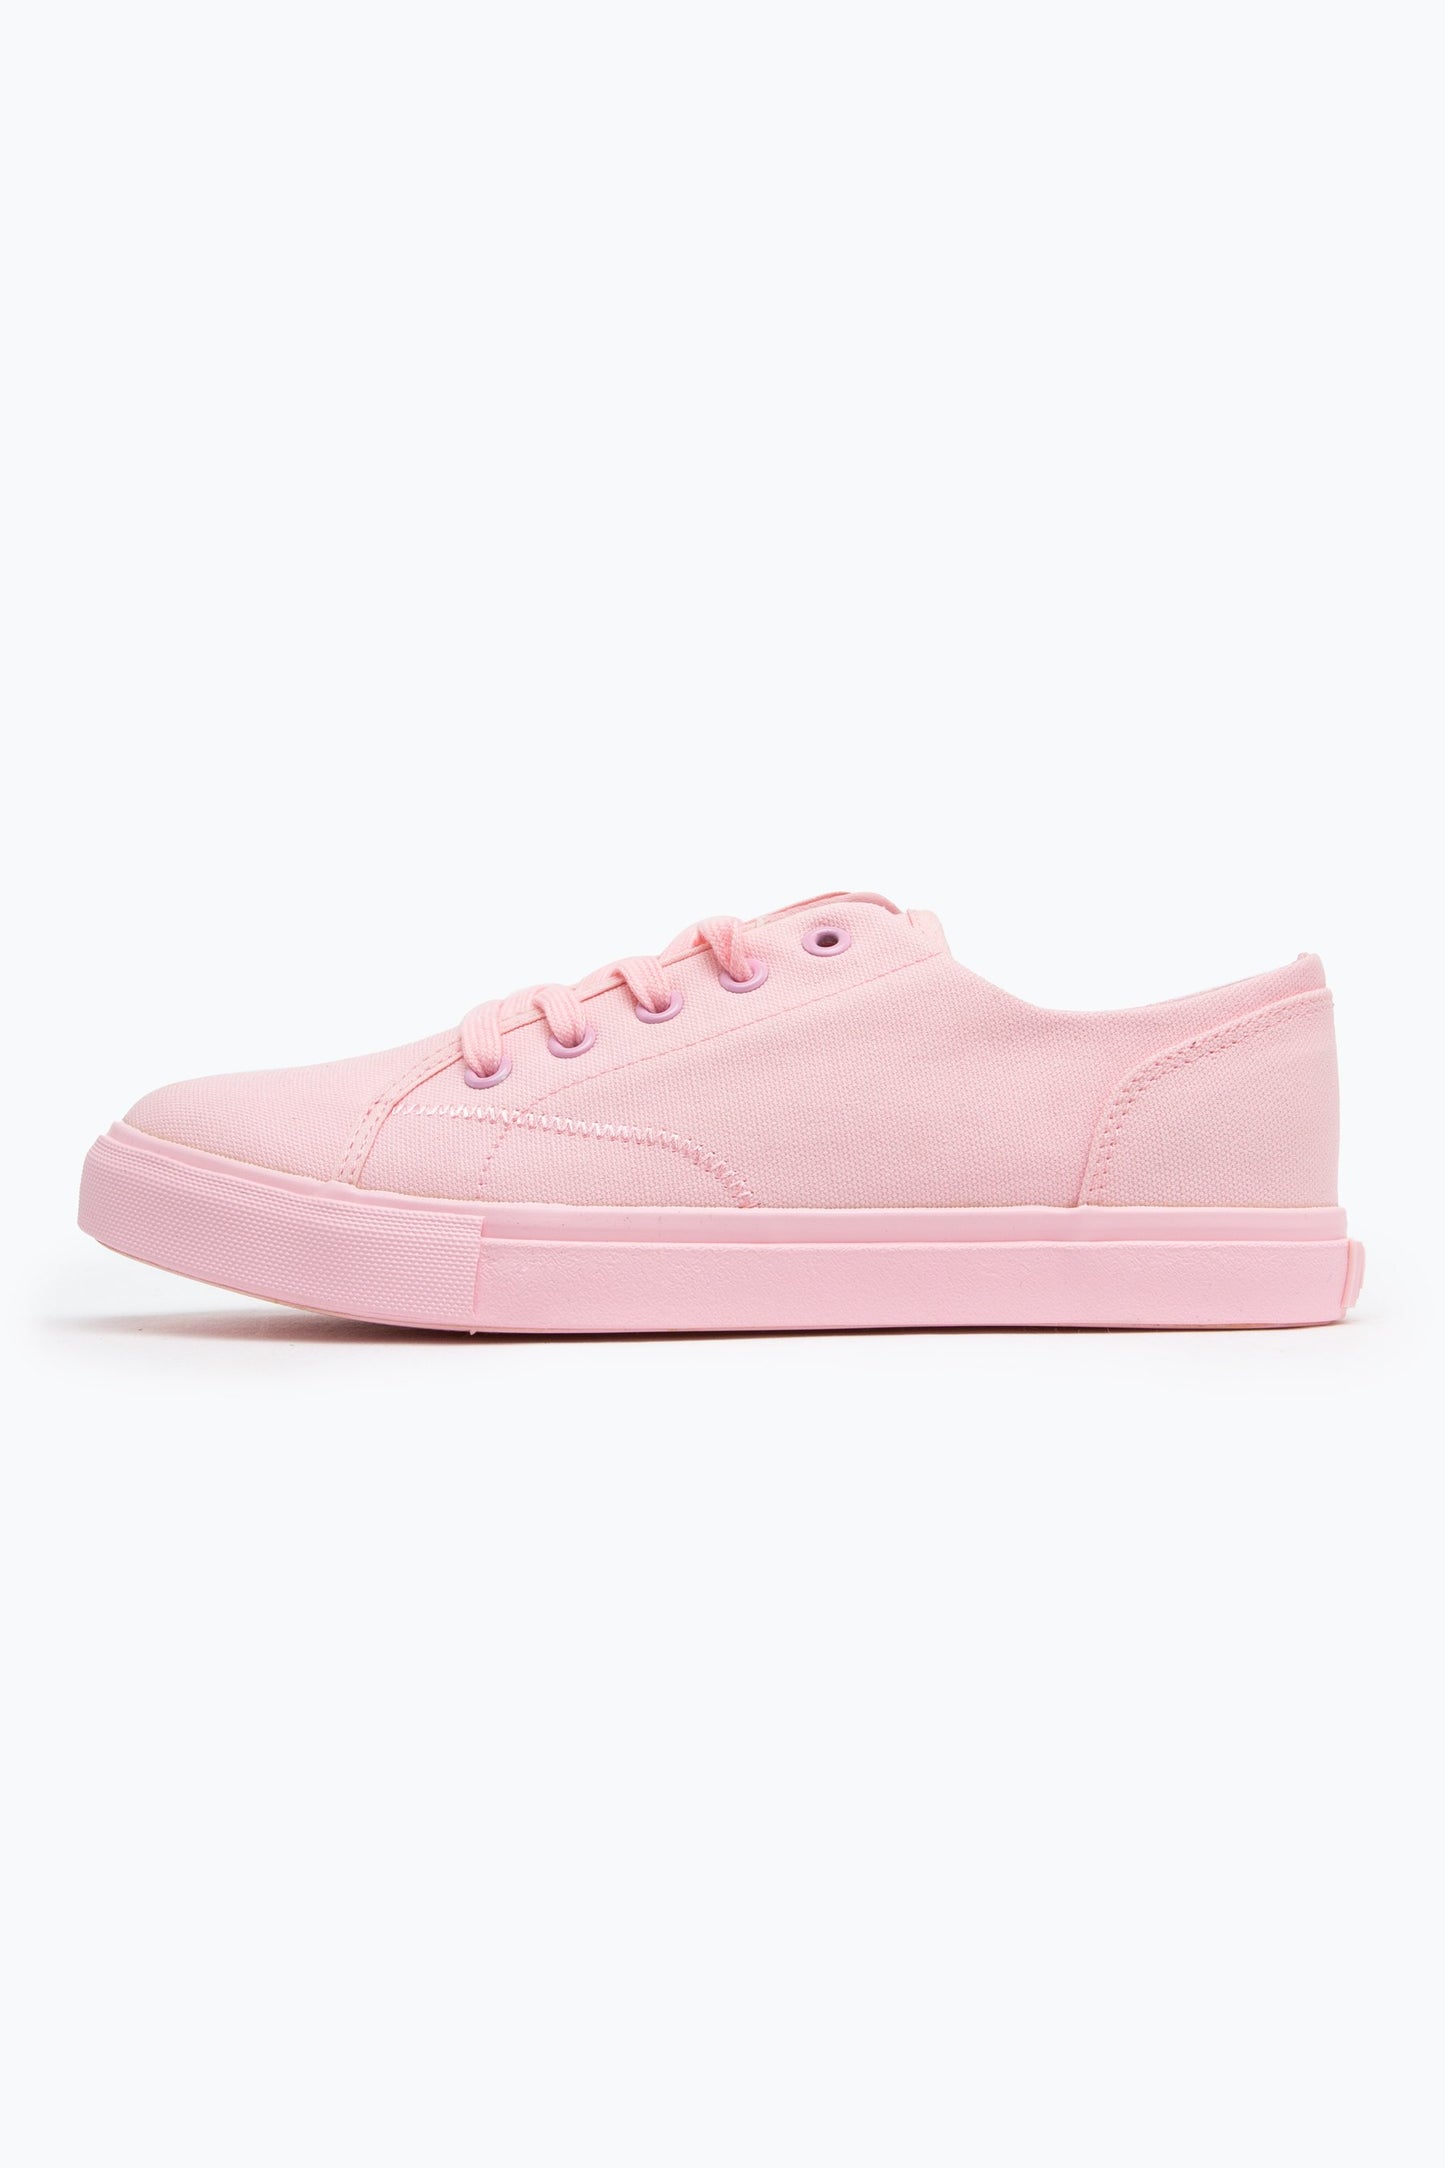 HYPE PINK PUMP KIDS TRAINERS